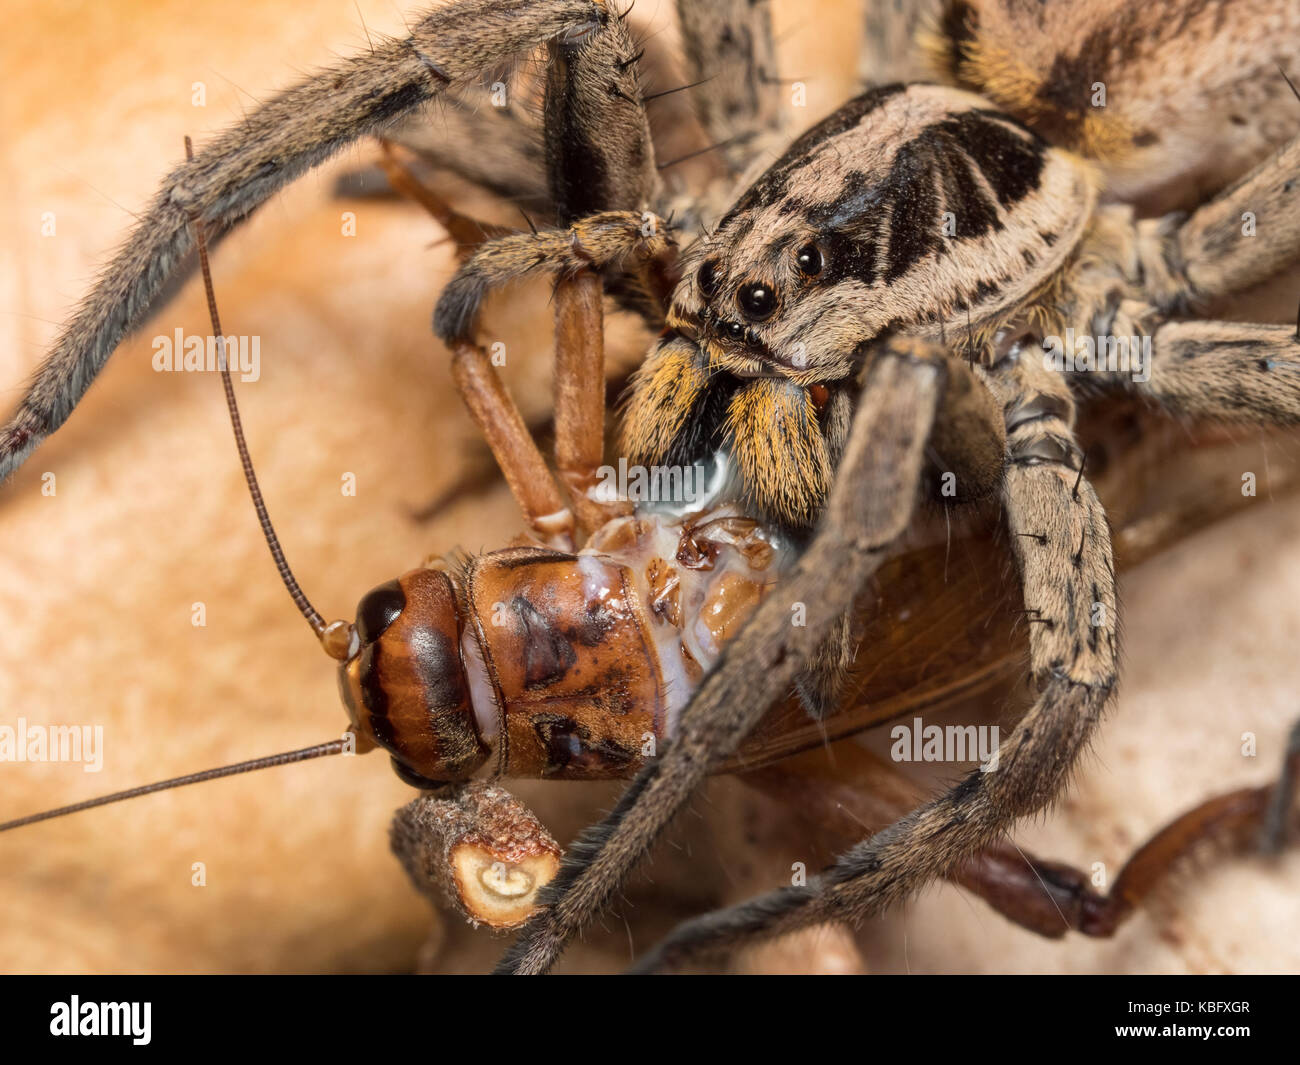 Spider fedding on a house cricket Stock Photo